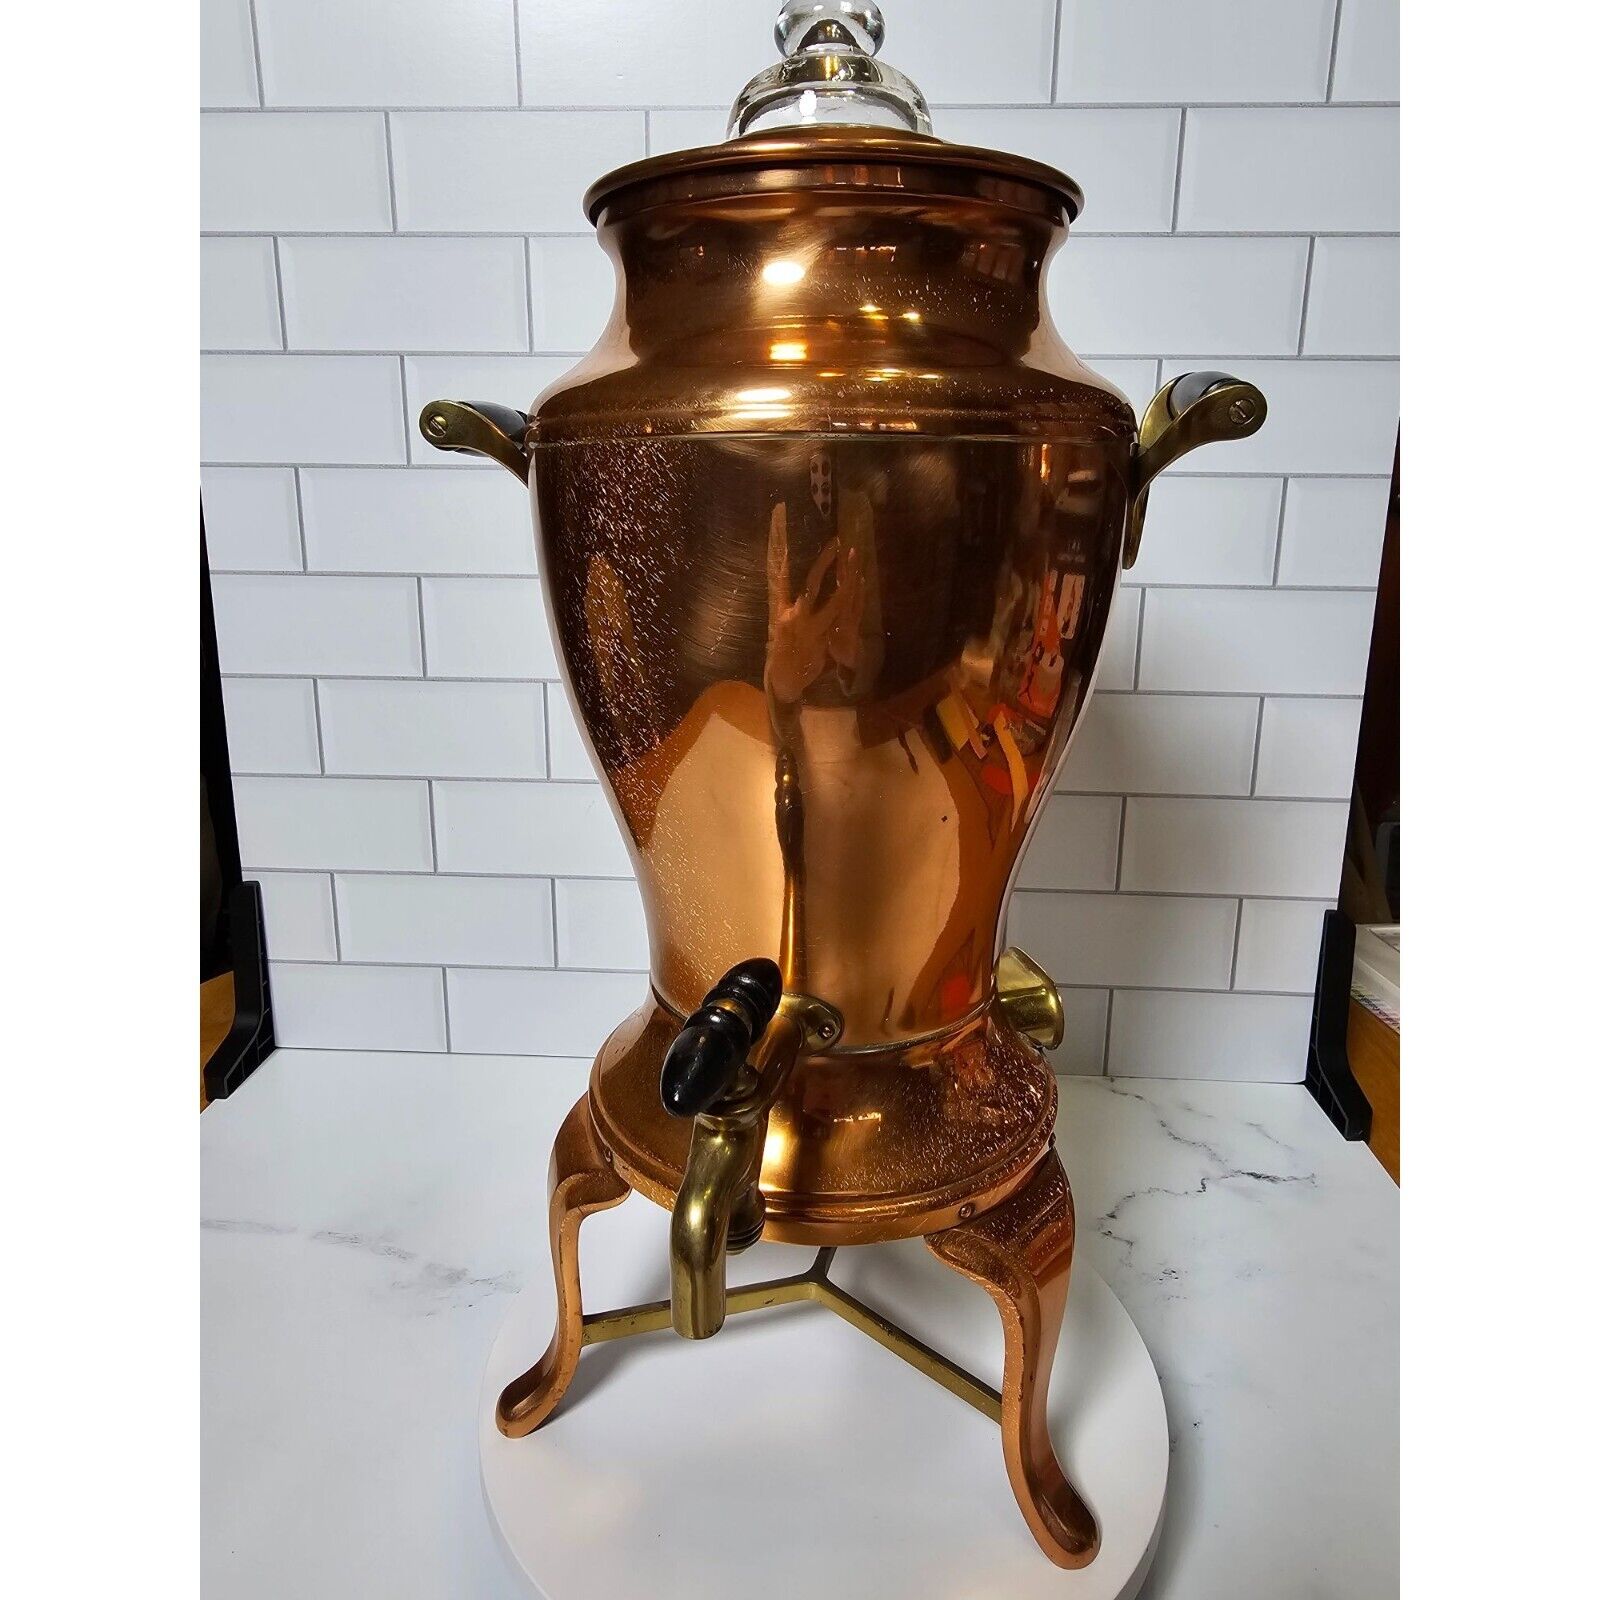 Antique Landers Frary and Clark Universal 06 Copper and Brass Coffee Percolator